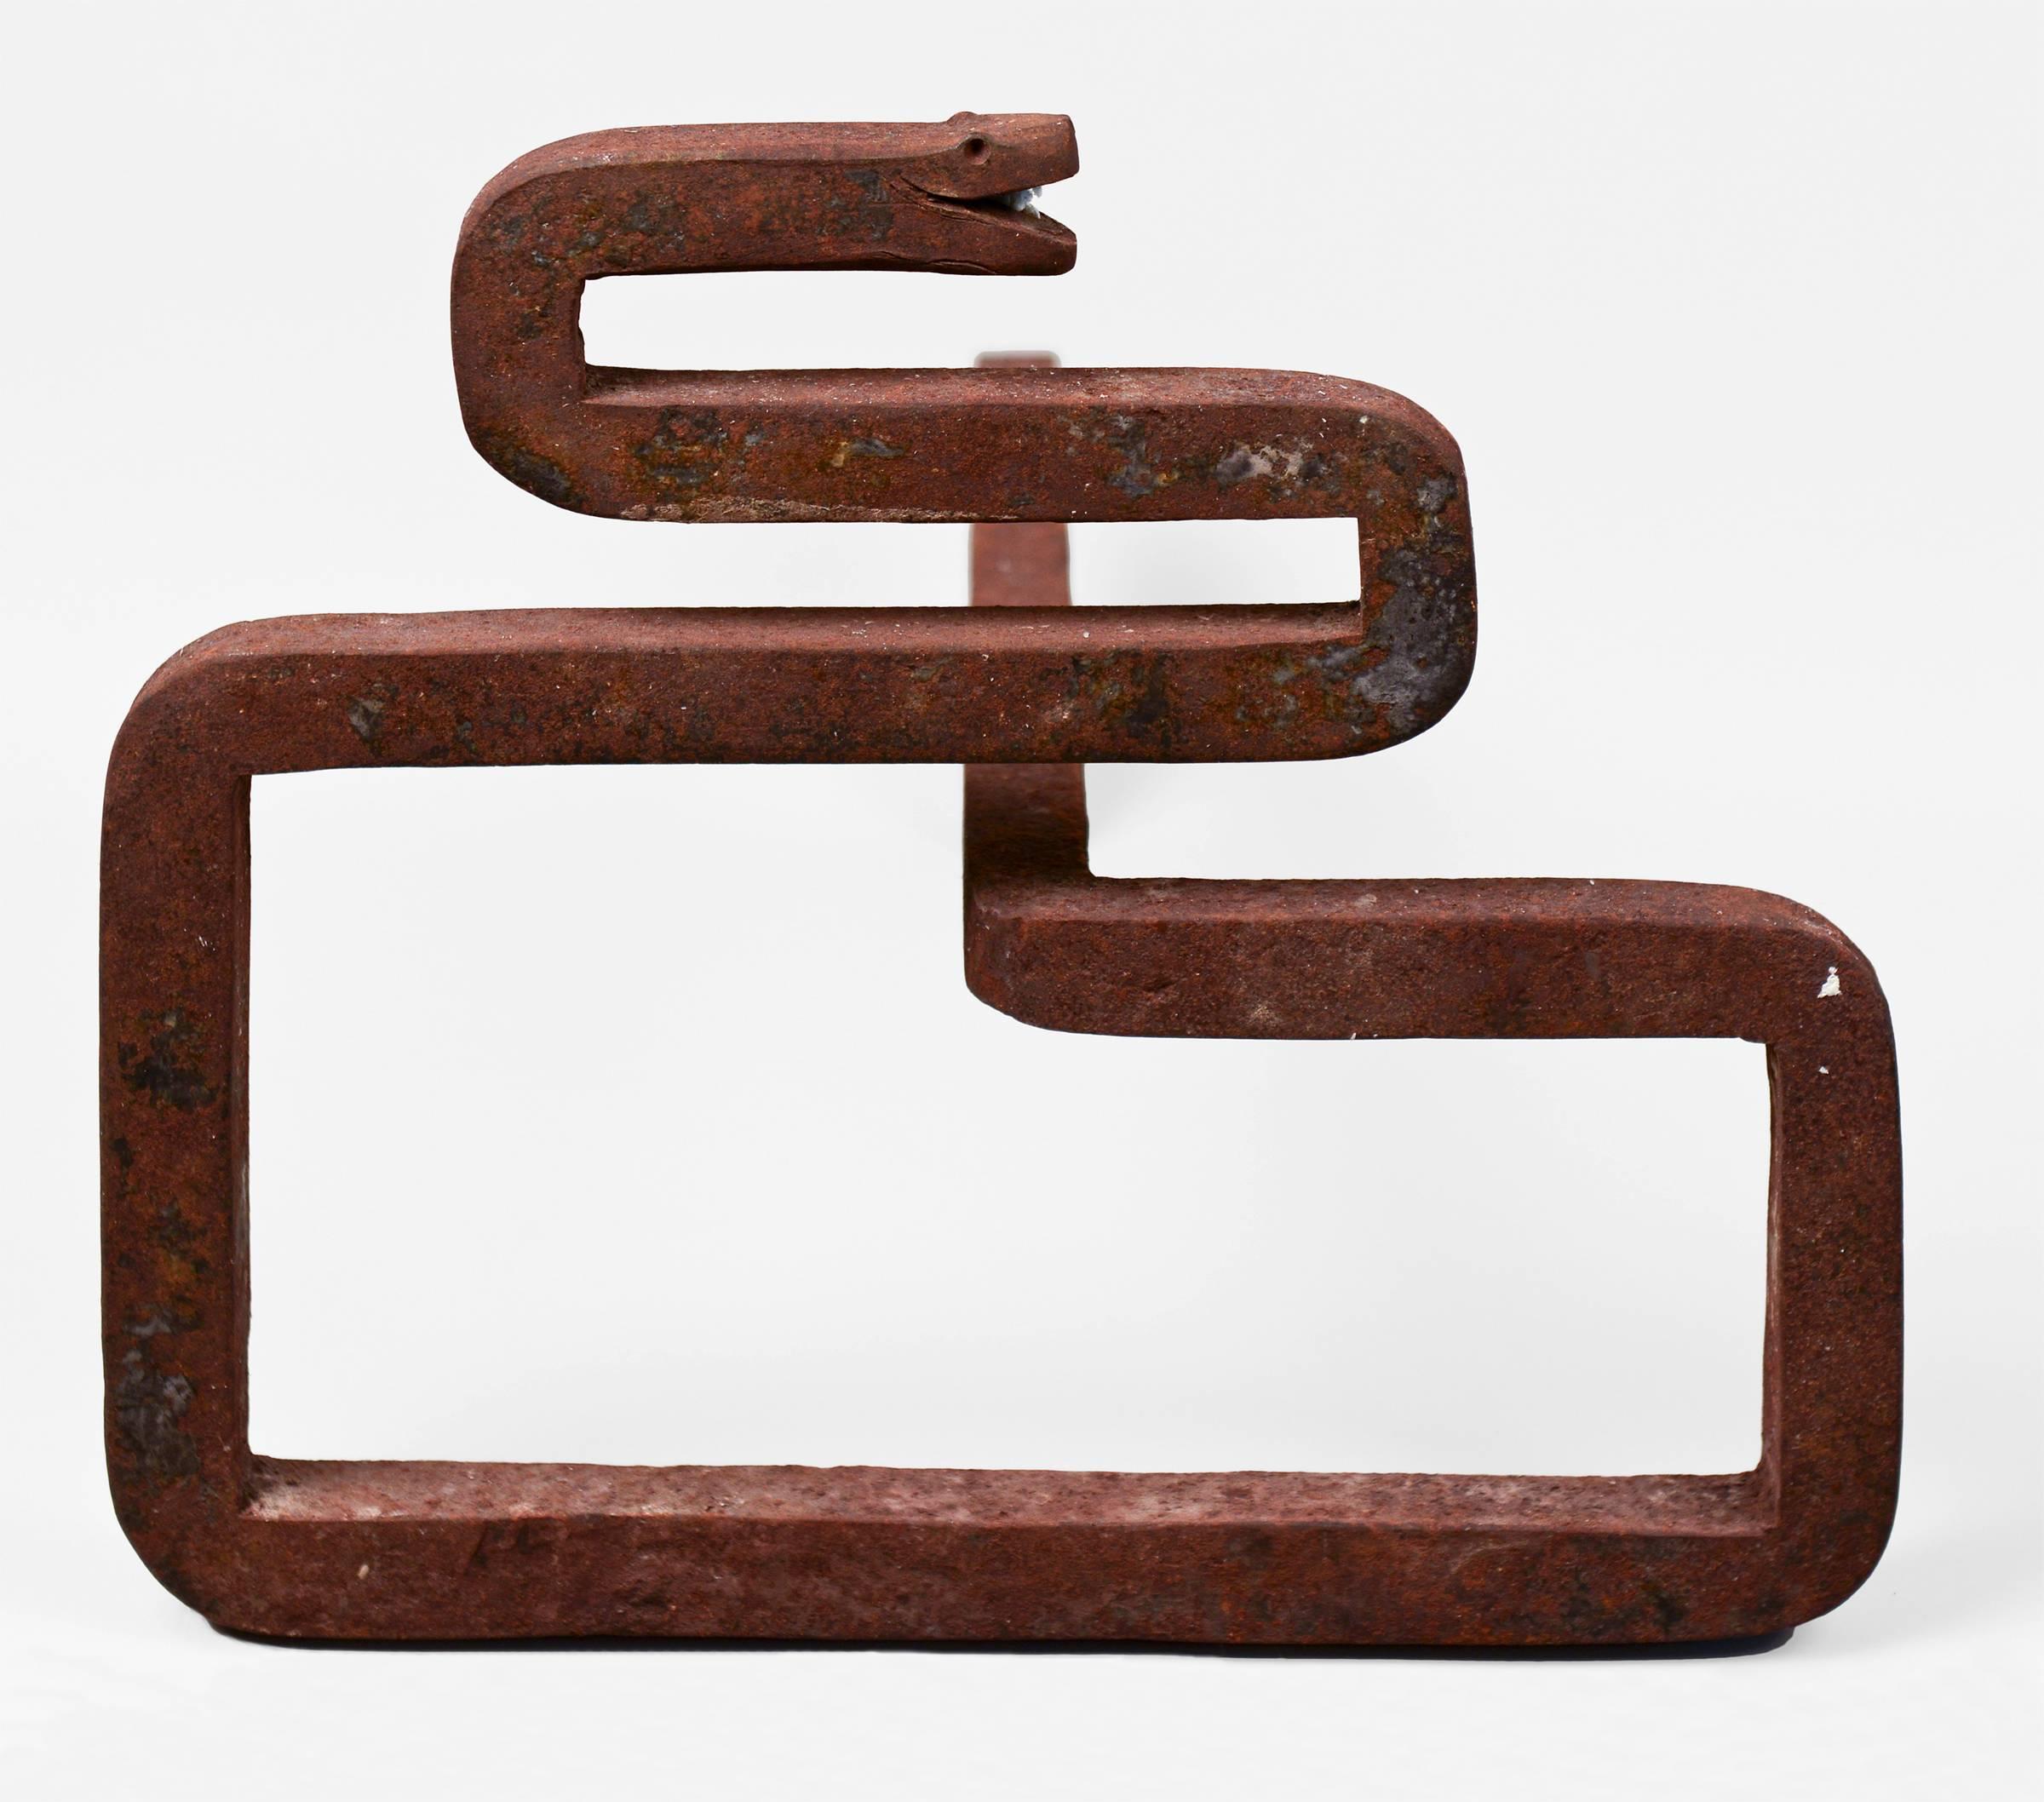 Unusual pair of iron snake andirons. A similar pair is published in Ricco Maresca, American Primitive, circa 1920.